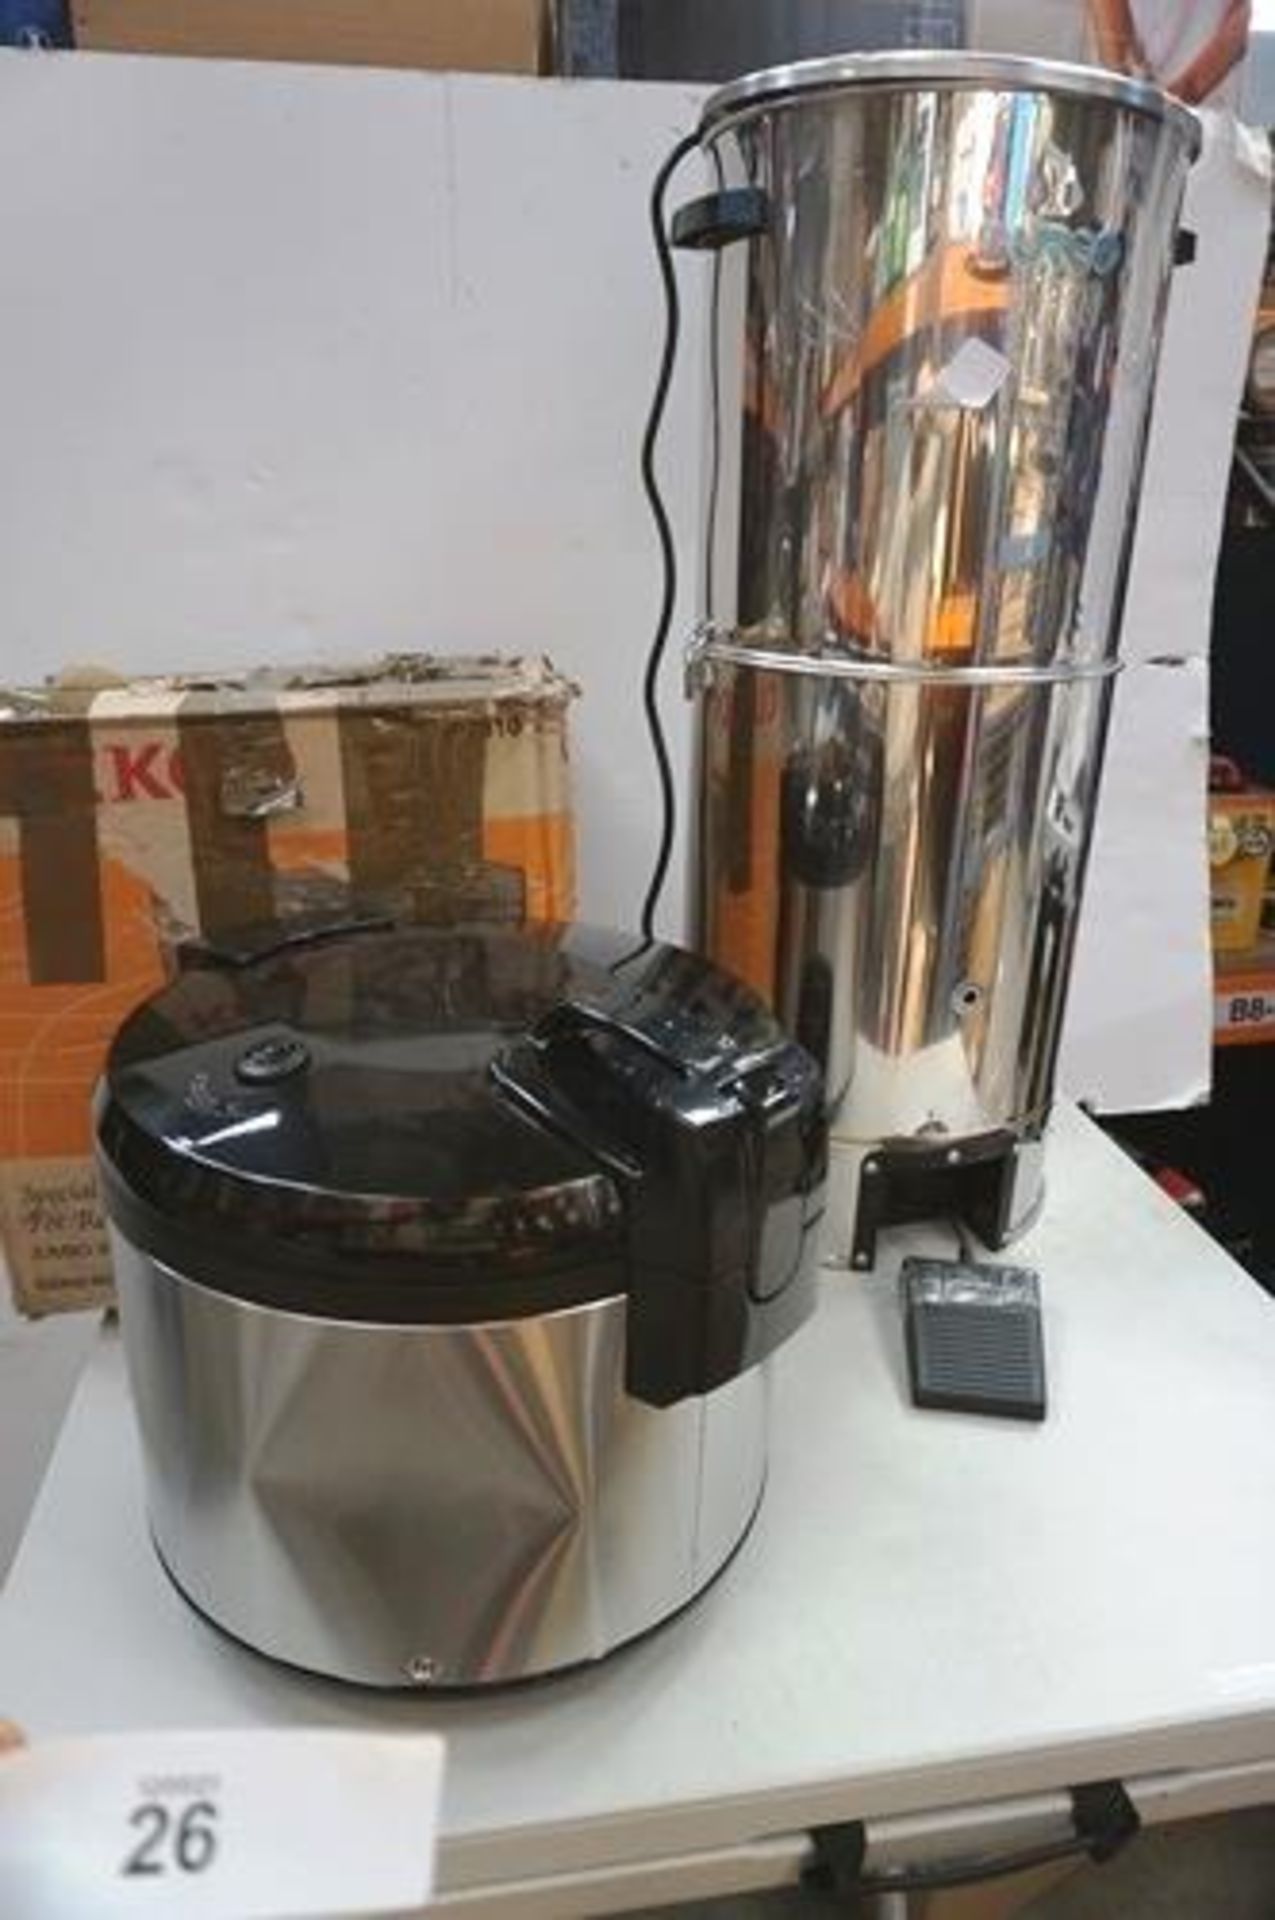 Cooks Professional commercial rice cooker with dented side, together with Burco portable hand